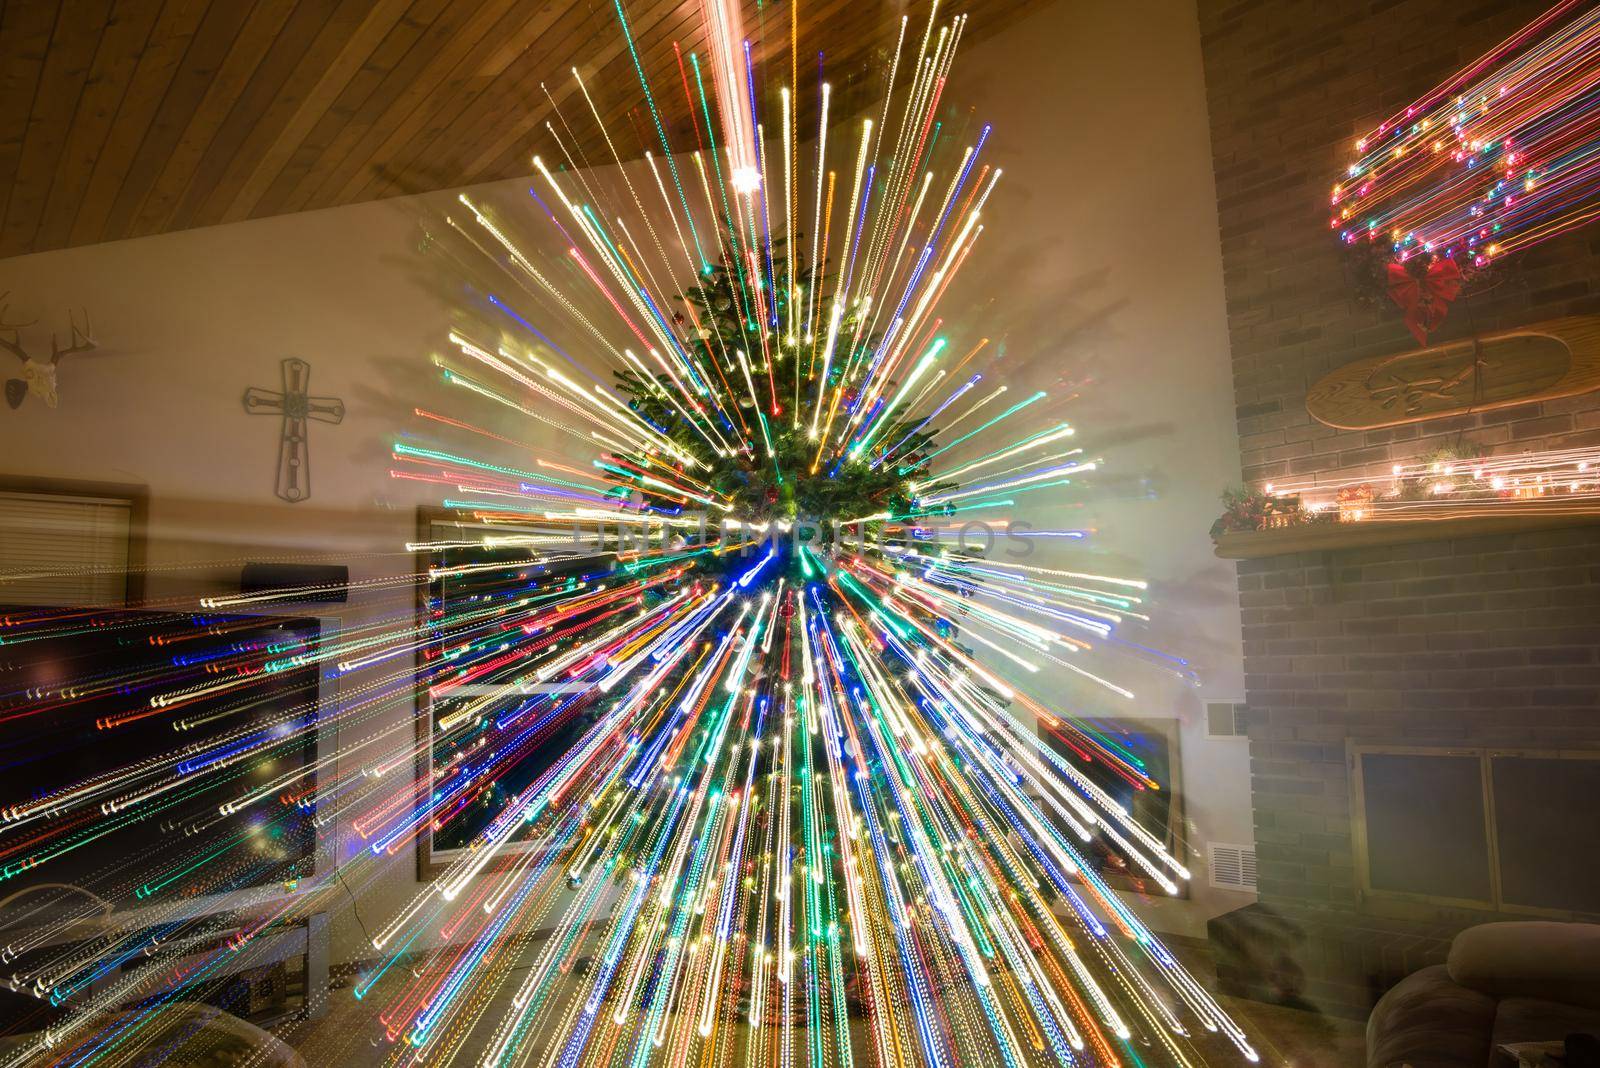 Large decorated Christmas tree inside of living room with light streaks